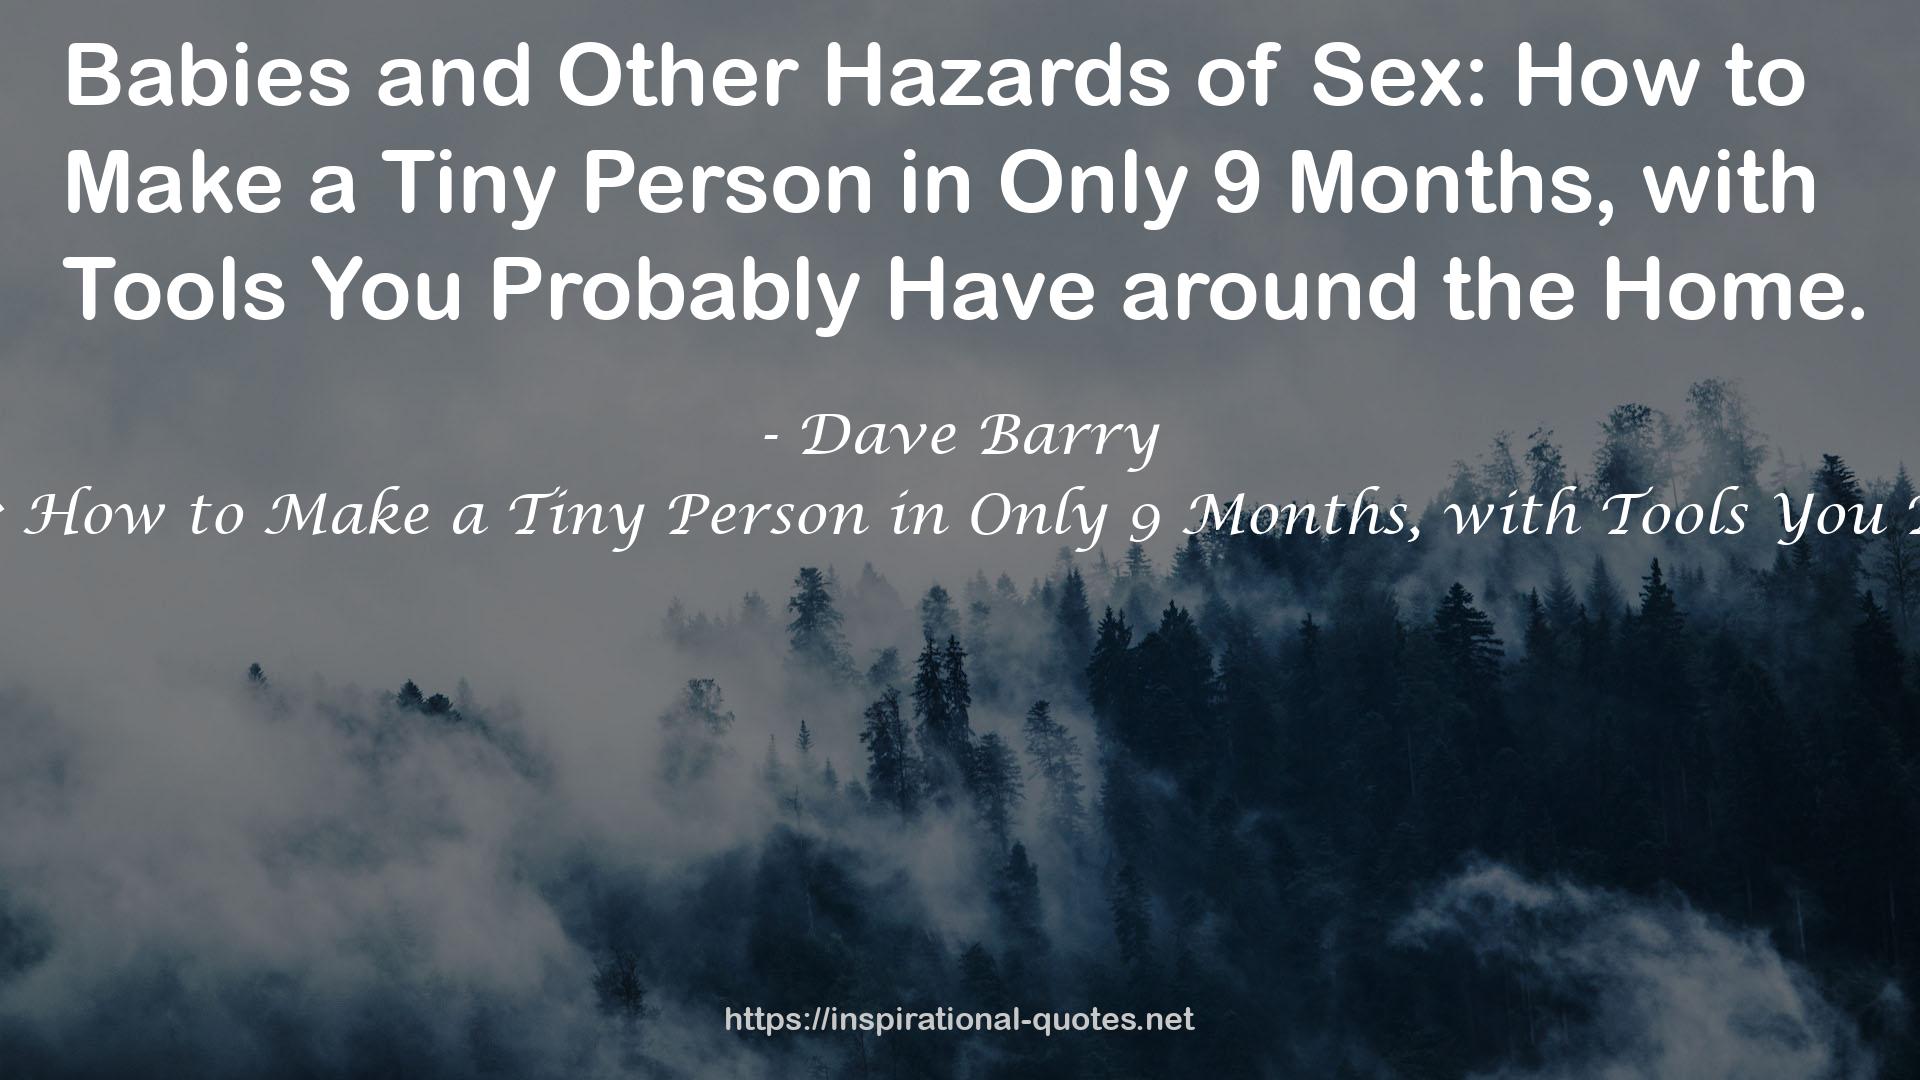 Babies and Other Hazards of Sex: How to Make a Tiny Person in Only 9 Months, with Tools You Probably Have Around the Home QUOTES